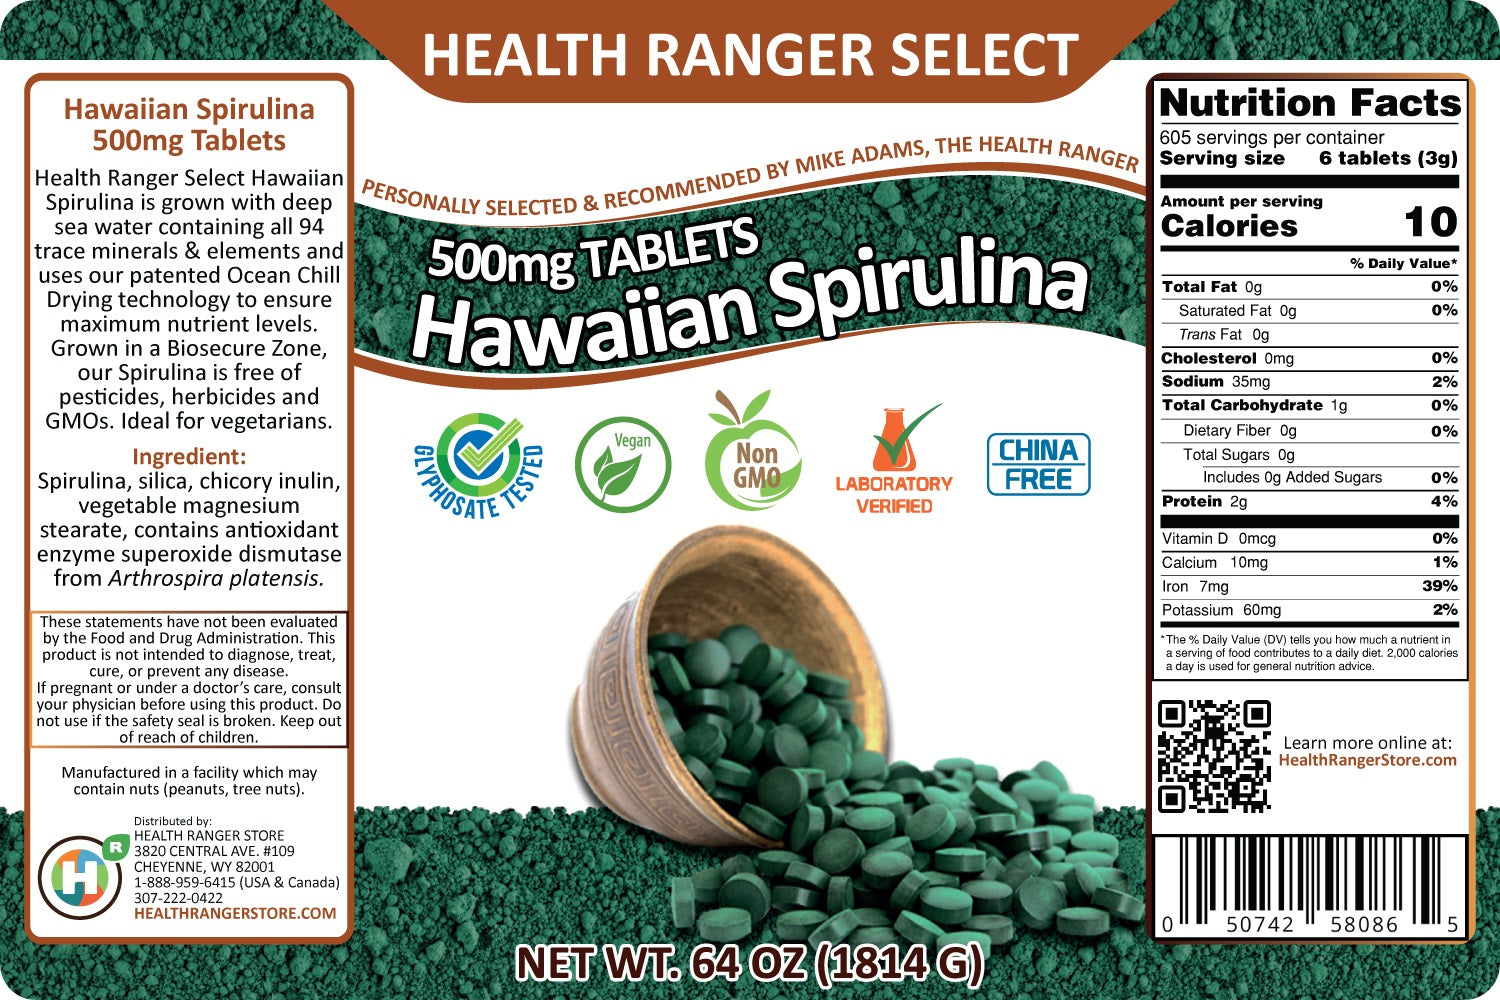 Hawaiian Spirulina Cold Pressed 500mg Tablets (64oz, 1814g), approximately 3628 tablets  (